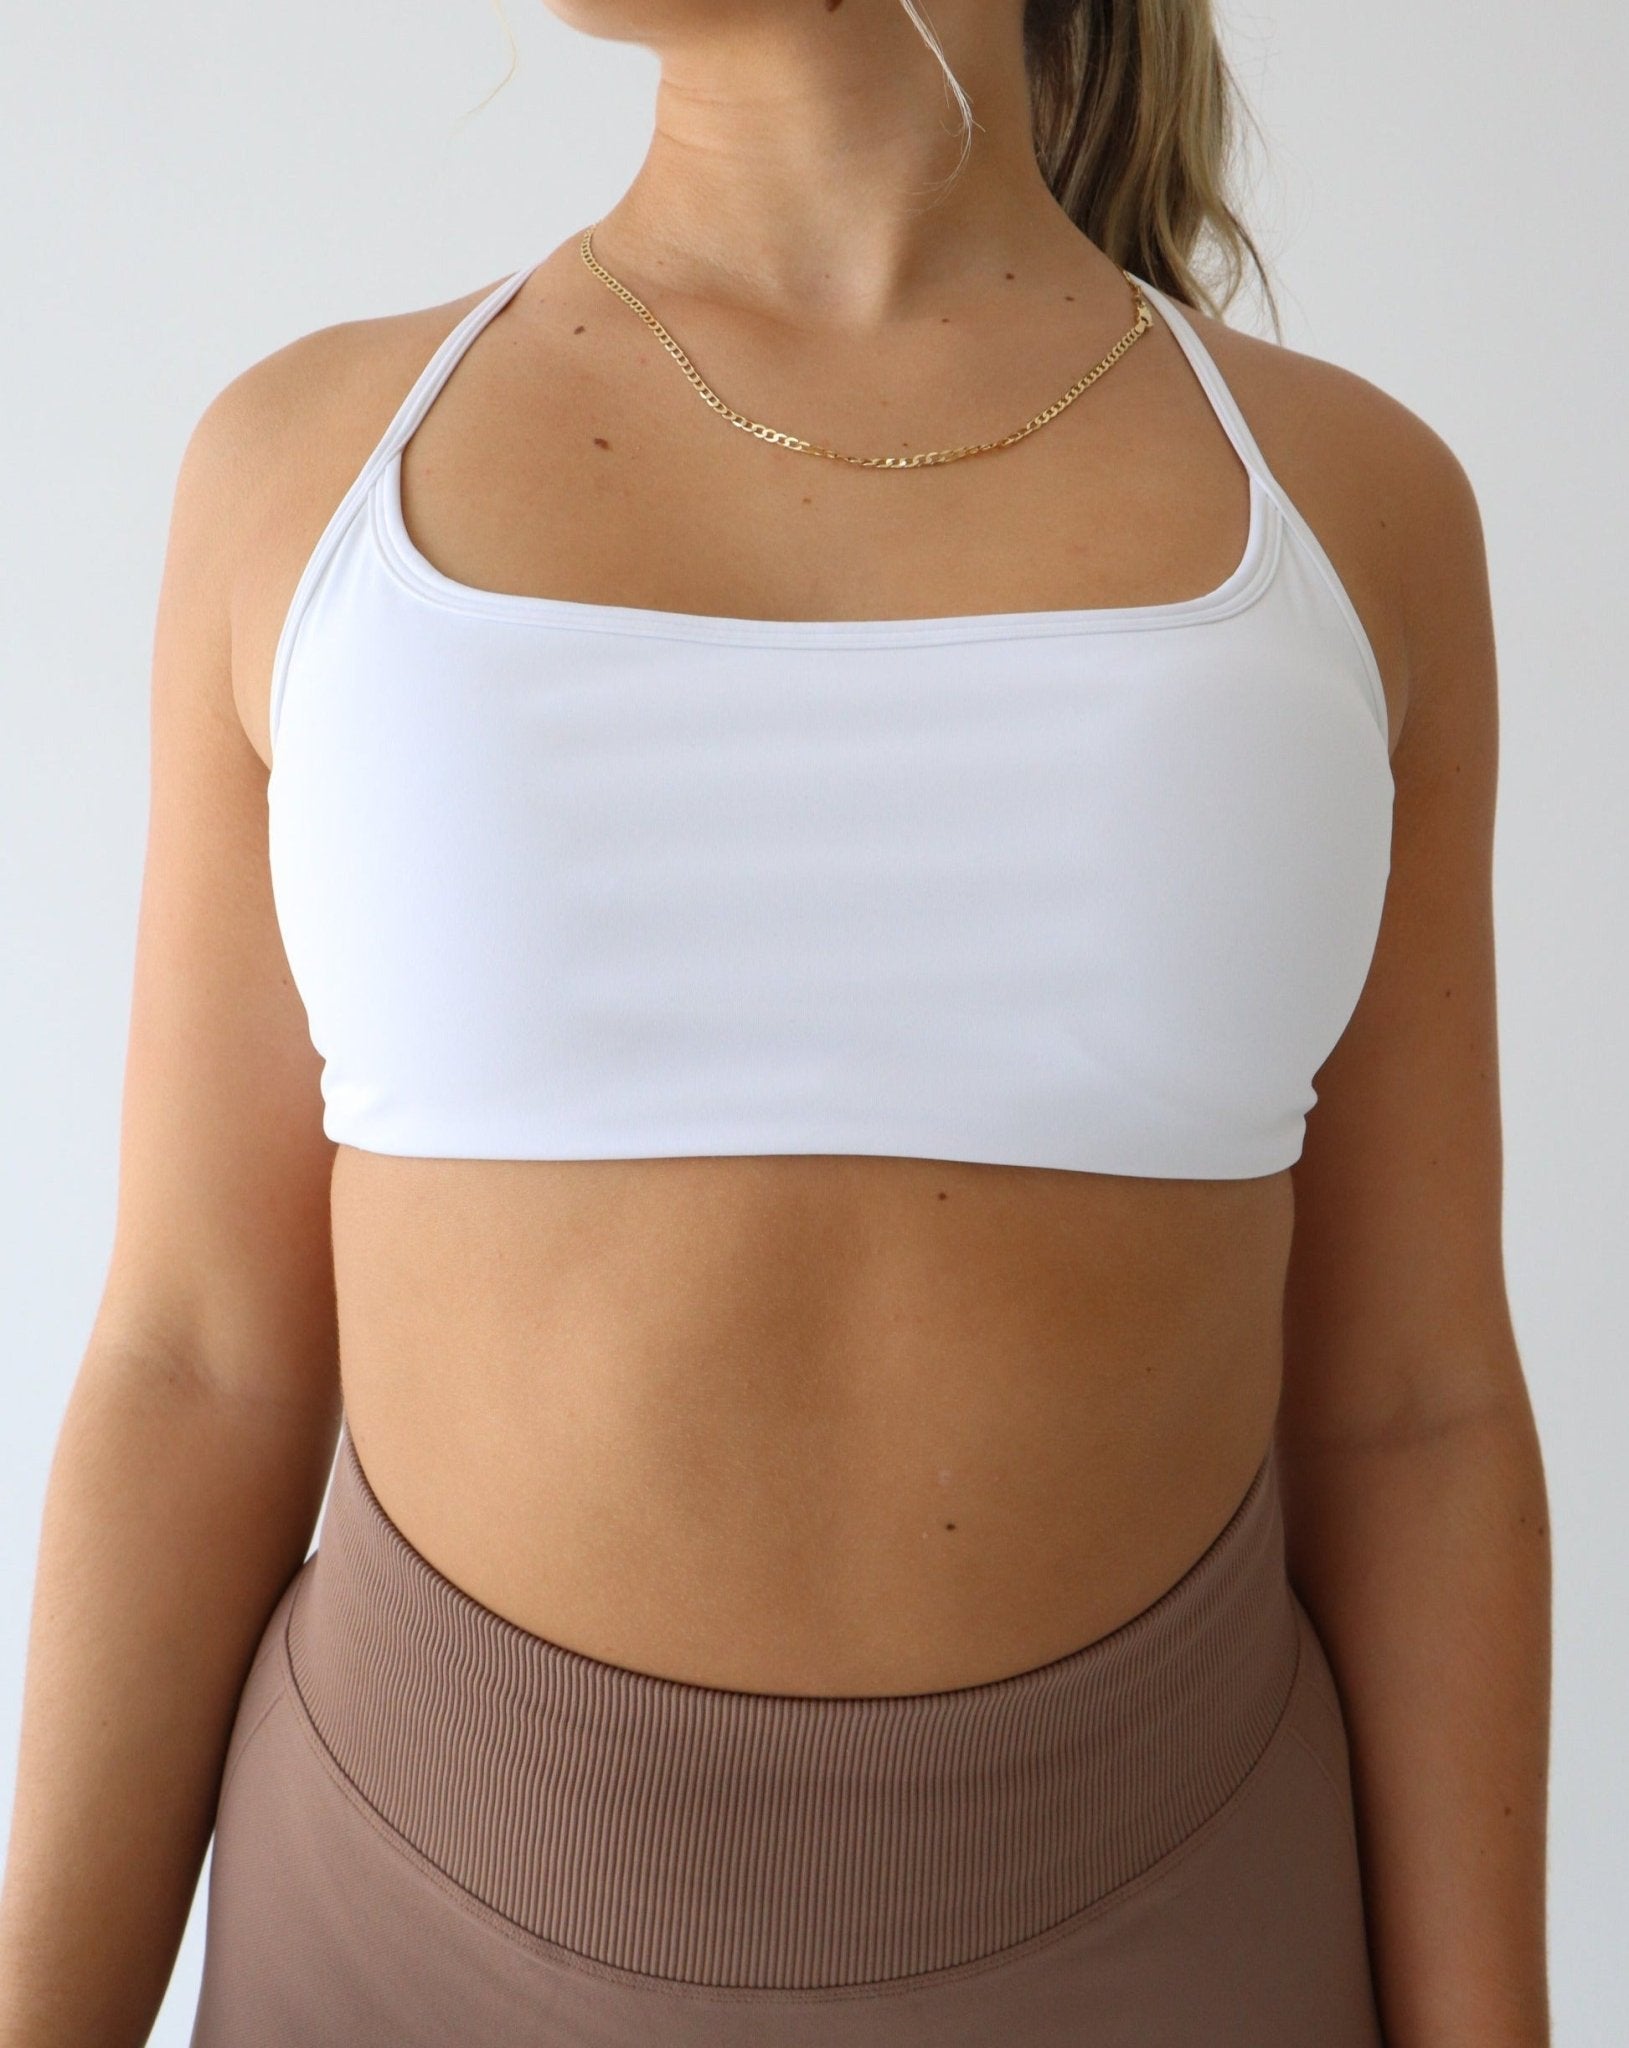 upgraded sports bra features